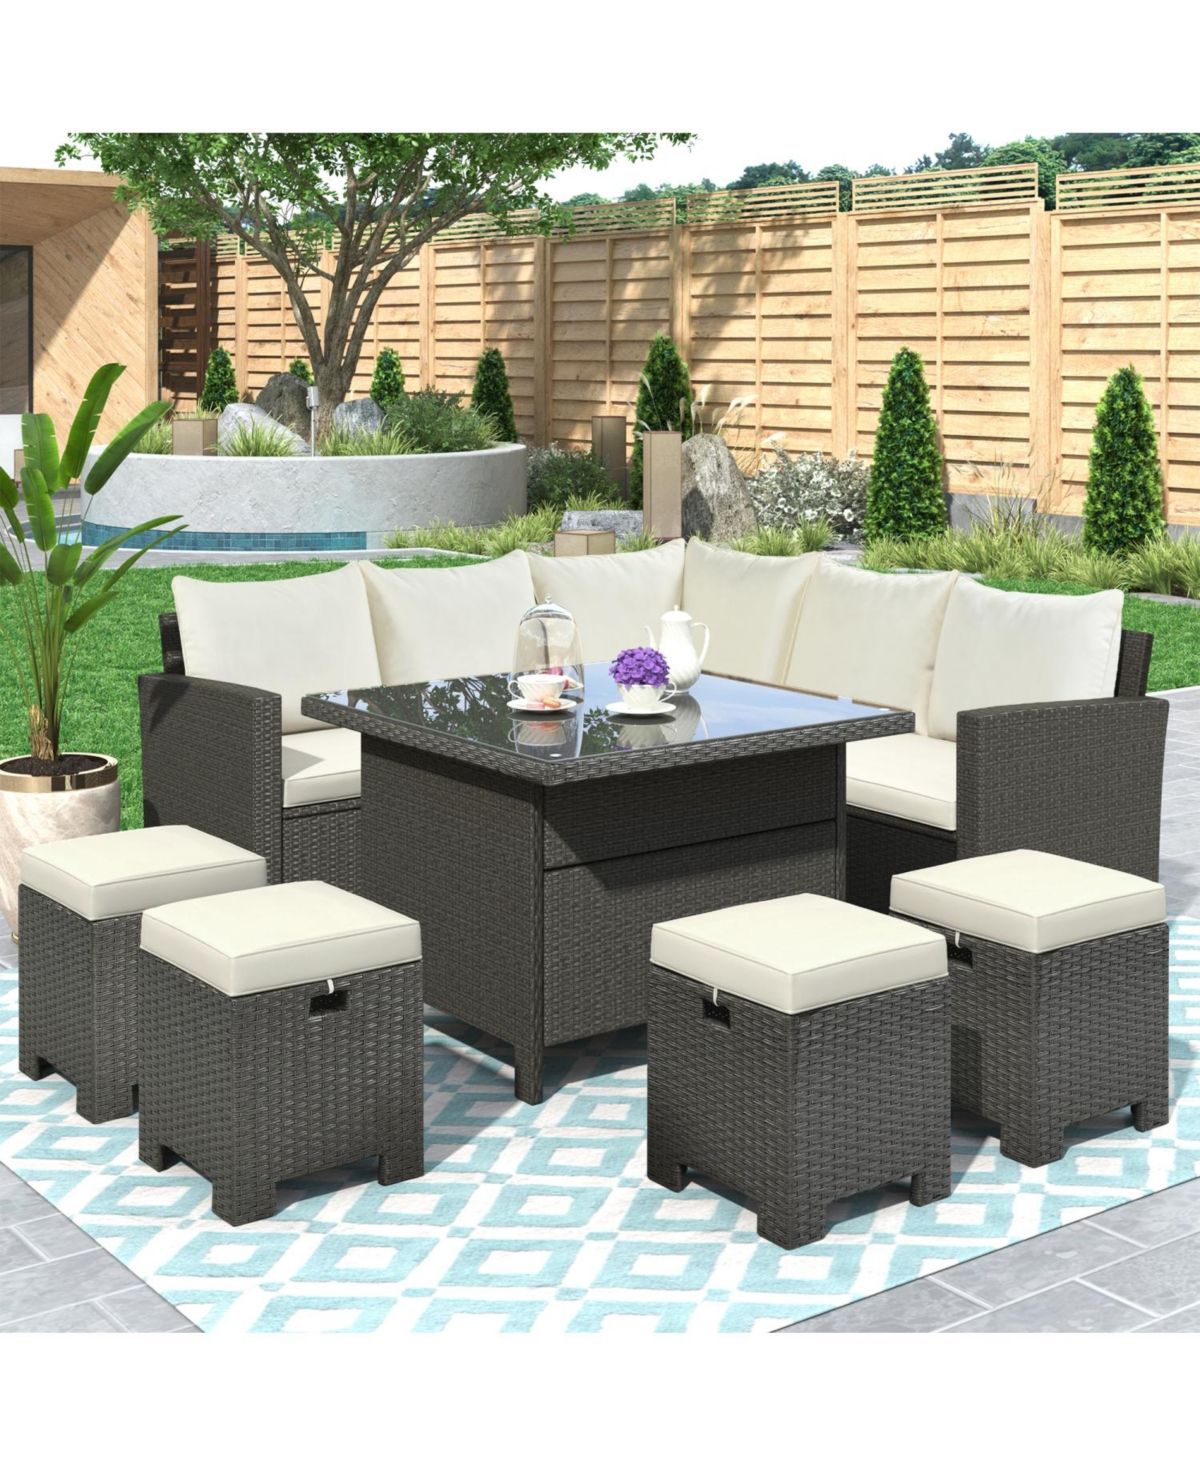 Patio Furniture Set, 8 Piece Outdoor Conversation Set, Dining Table Chair  With Ottoman, Cushions Pertaining To 8 Piece Patio Rattan Outdoor Furniture Set (Photo 14 of 15)